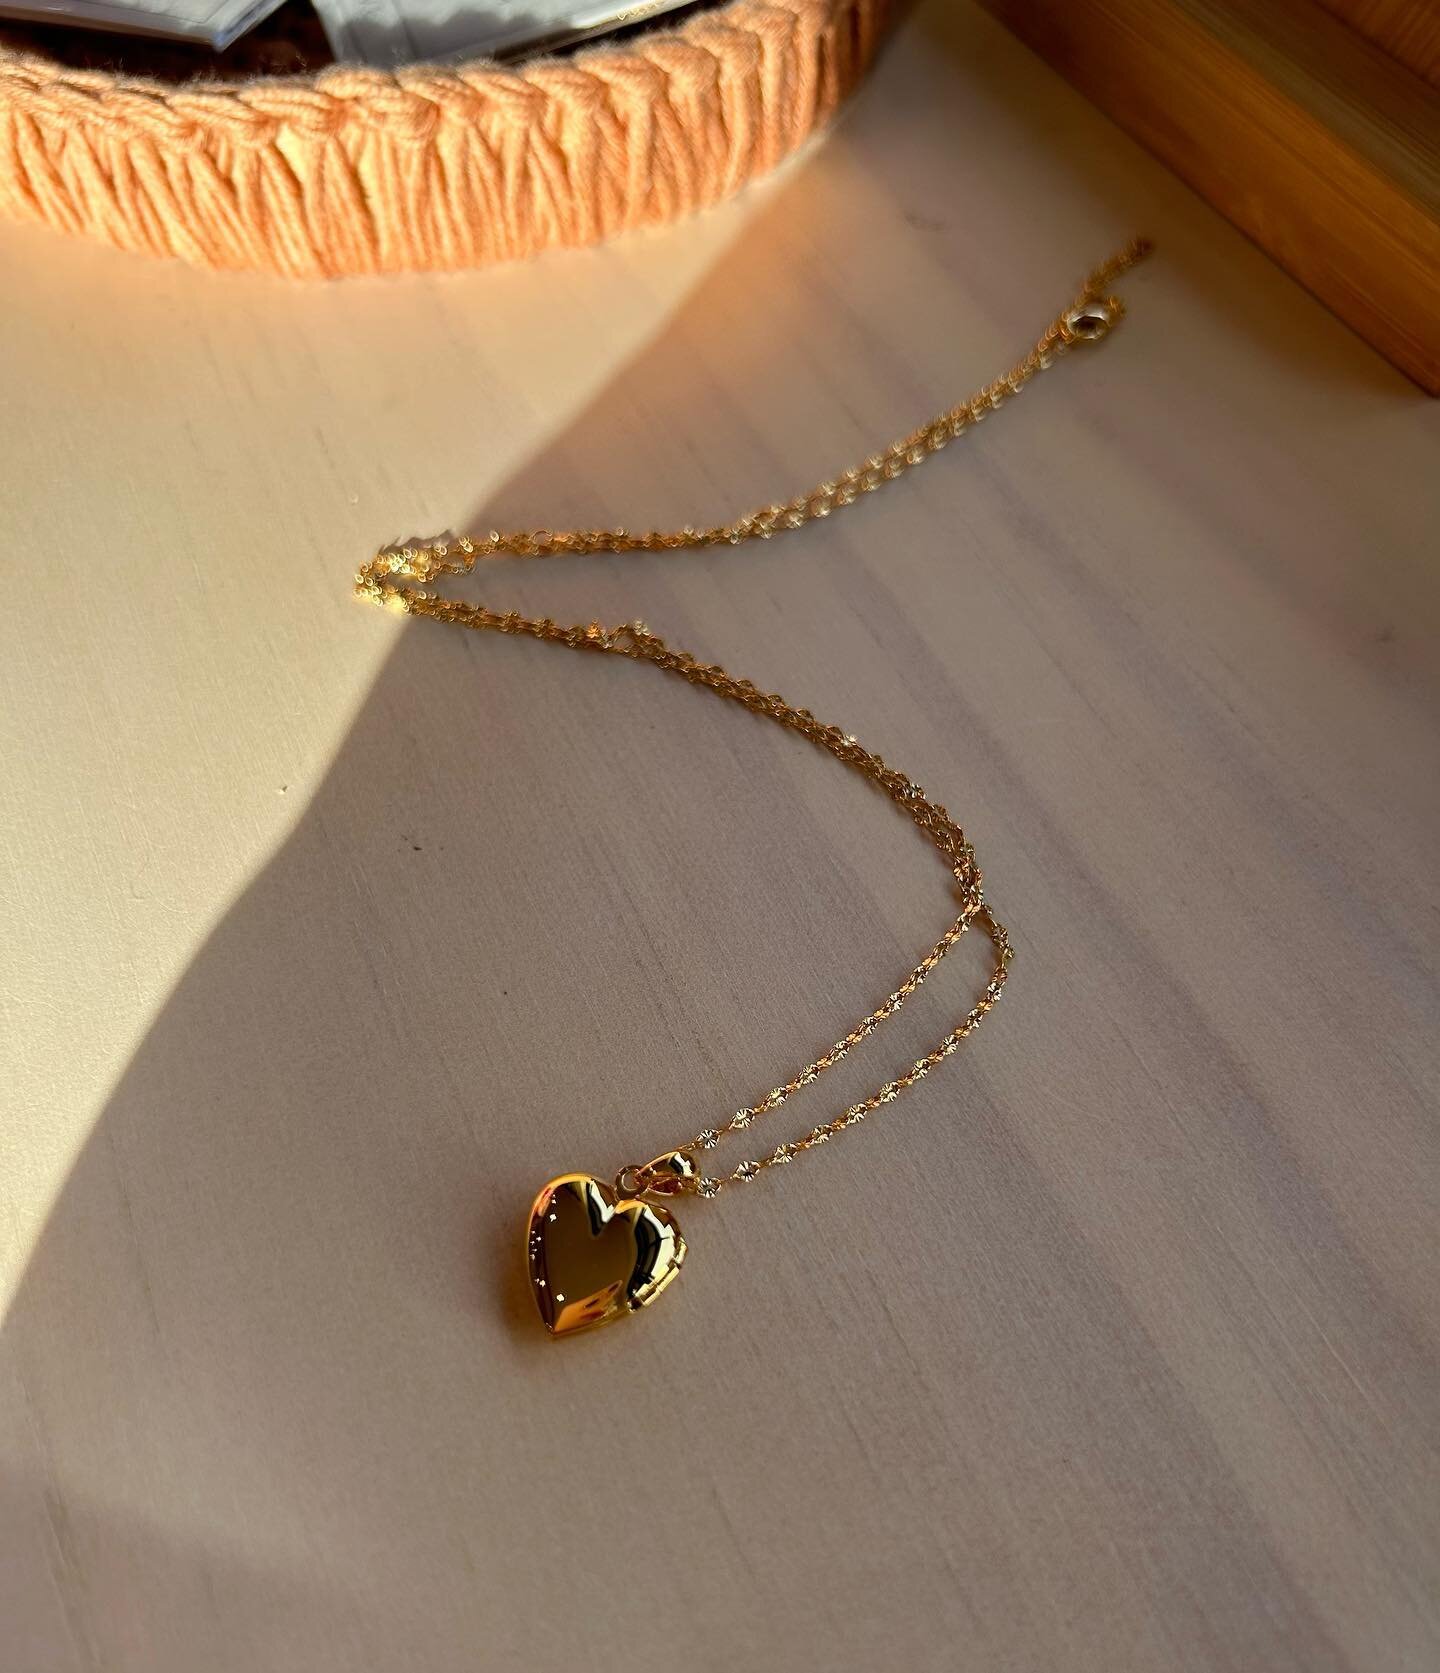 Give the one you love something special this Valentine&rsquo;s Day! This adorable heart locket is just one little beauty from our restocked collection of gold jewelry. Come by today 10-5pm! 💕